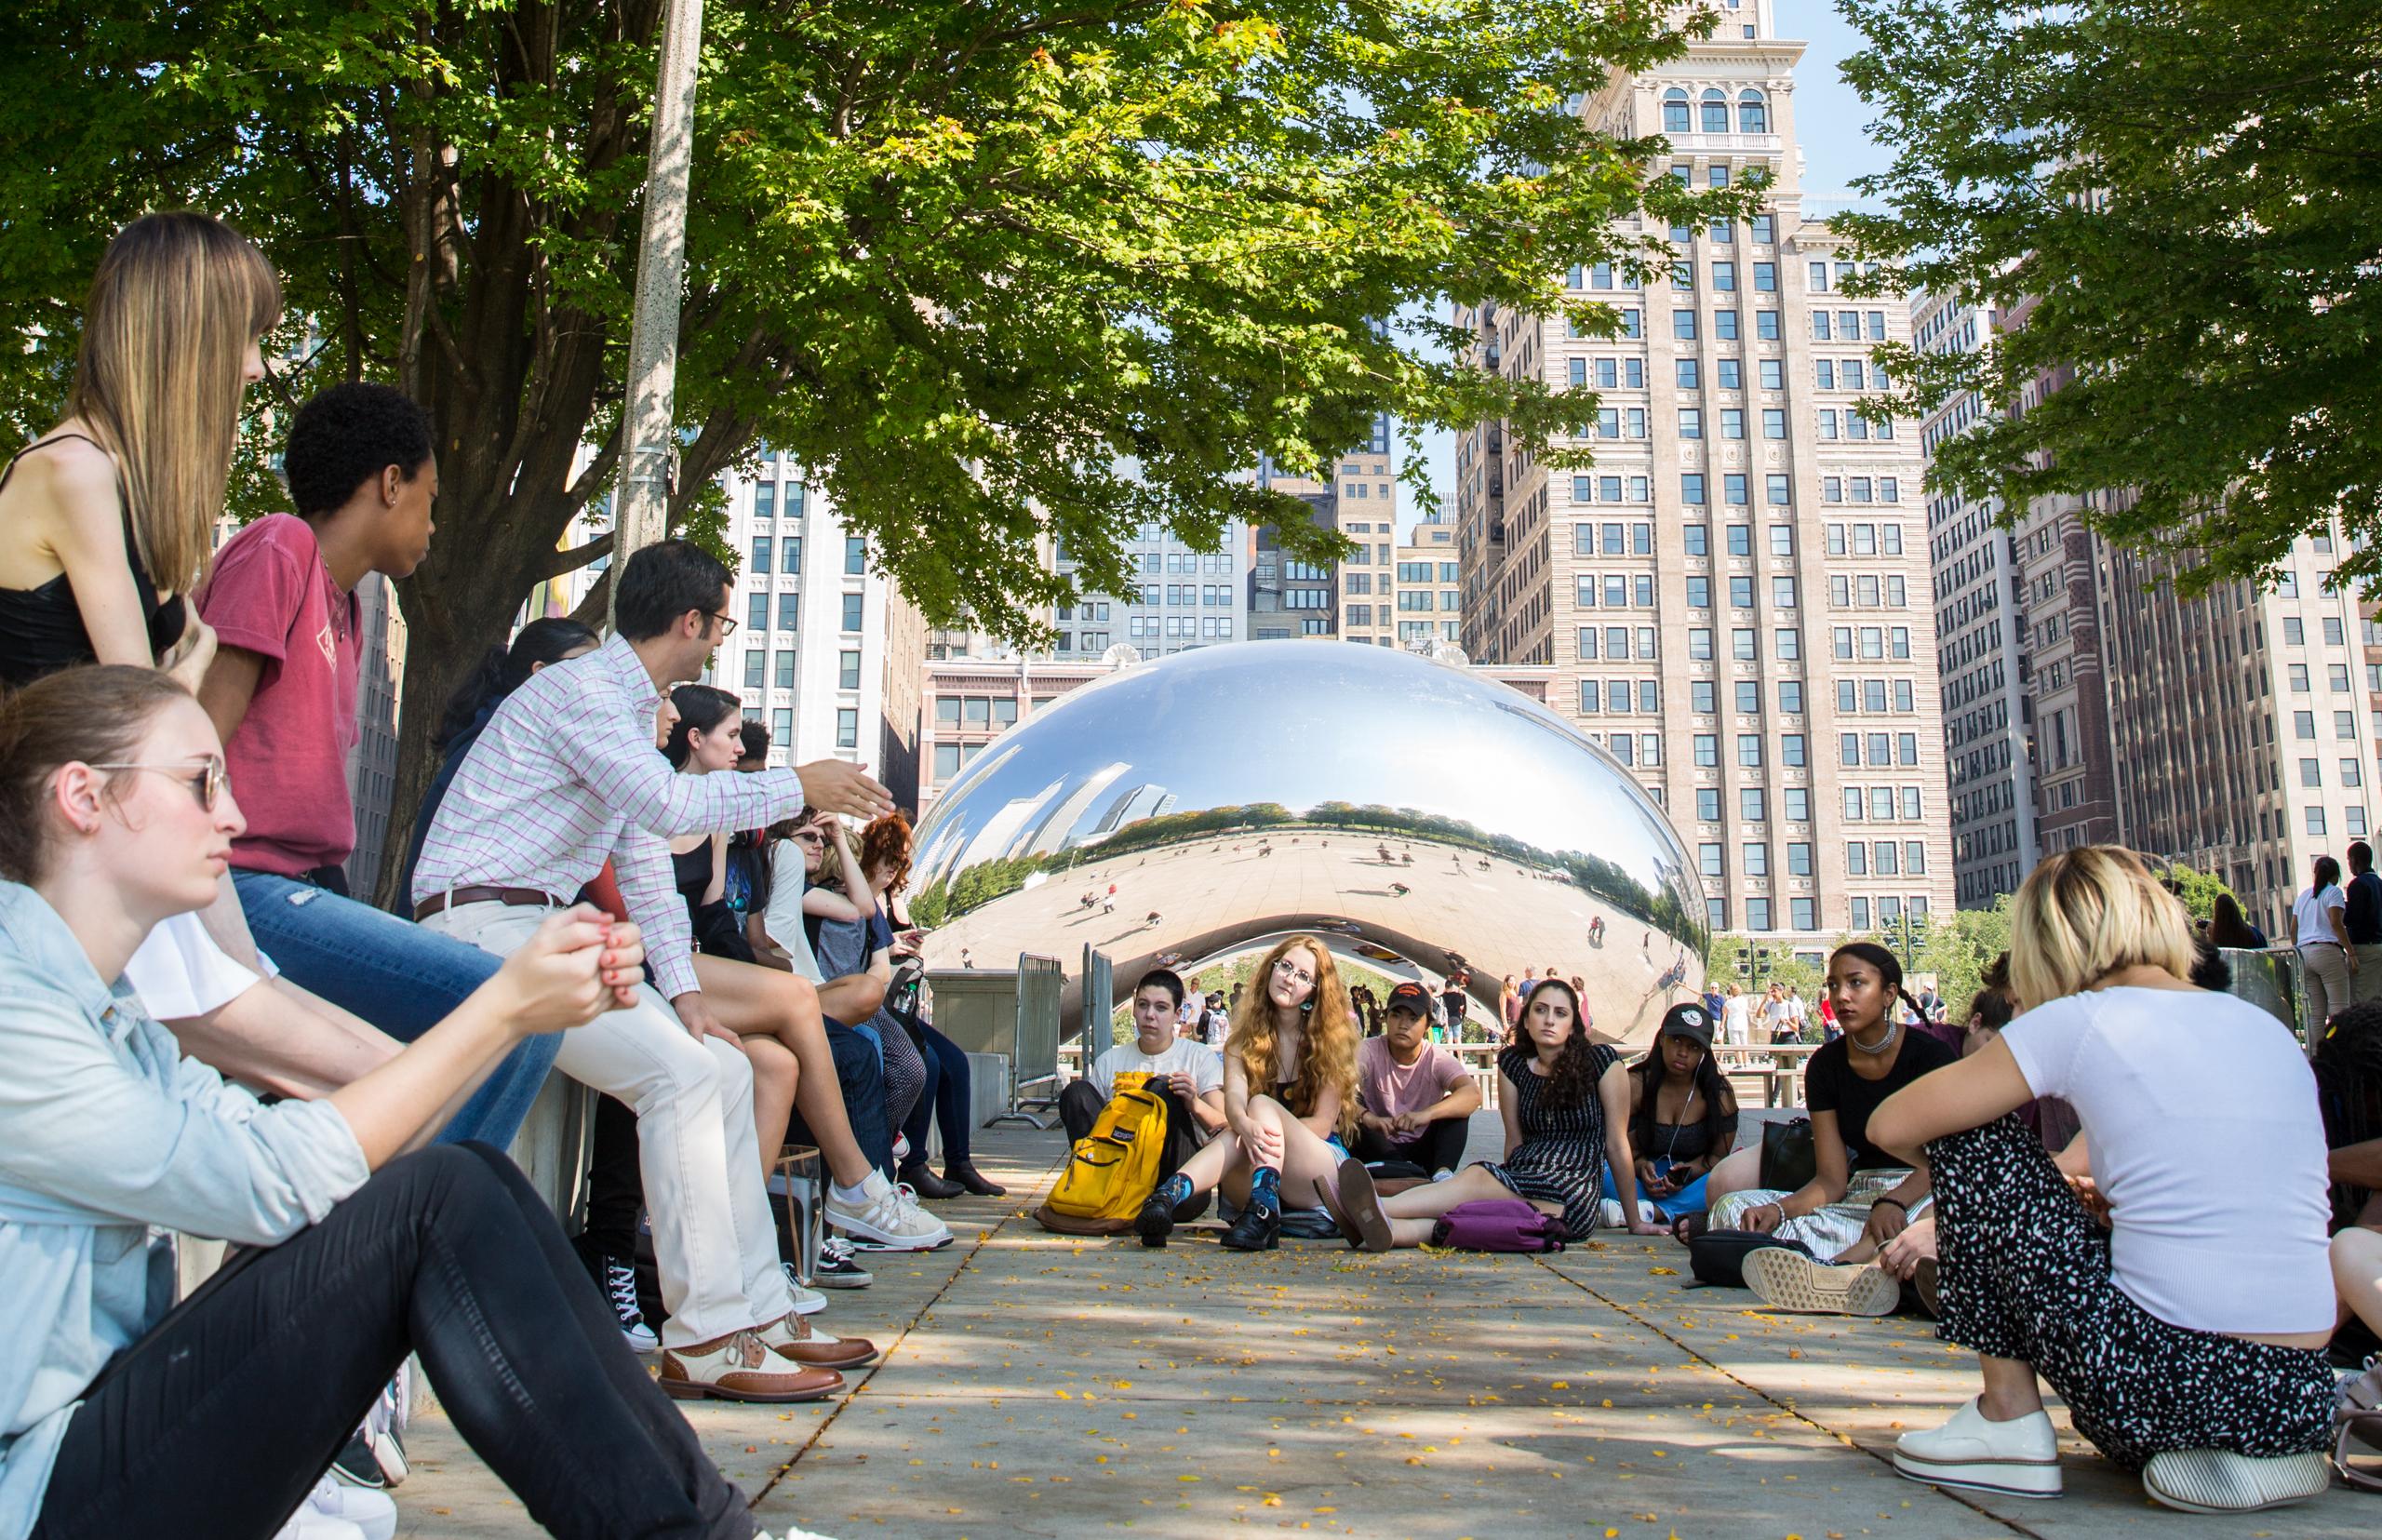 students sitting outside on a sunny day near bean shaped chrome reflective sculpture Cloud Gate in Milennnium Park